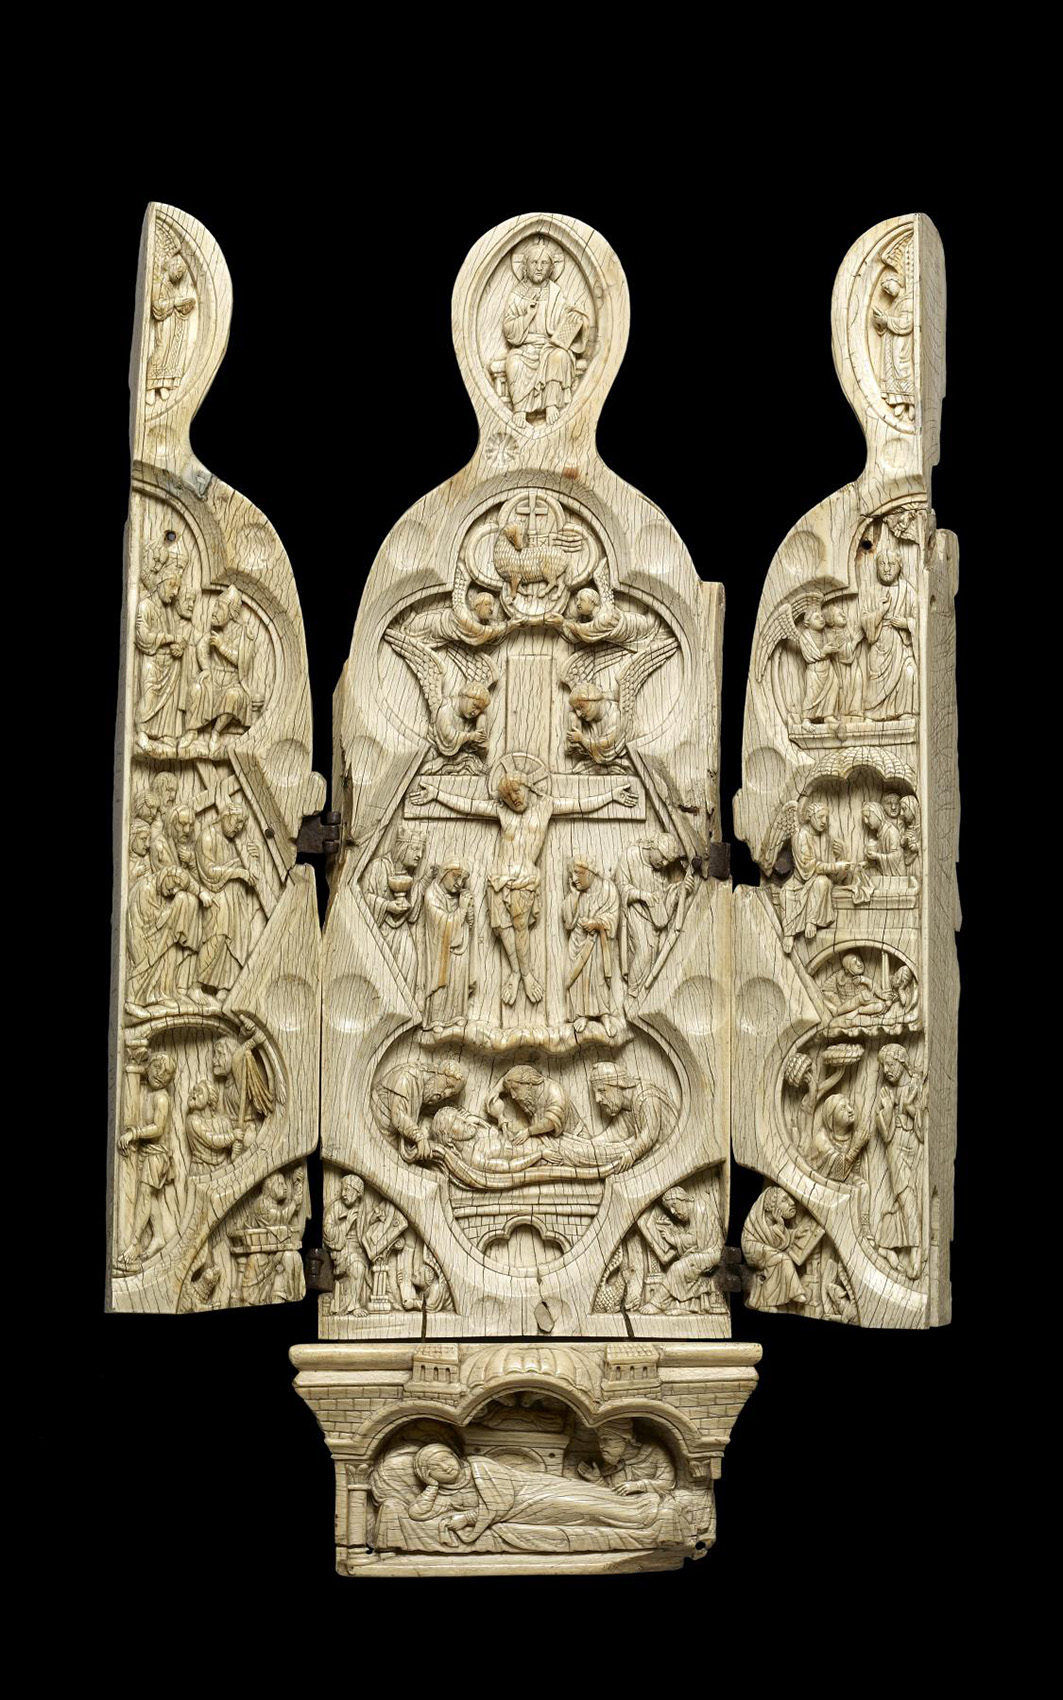 An open ivory triptych carved with many figures in multiple scenes.